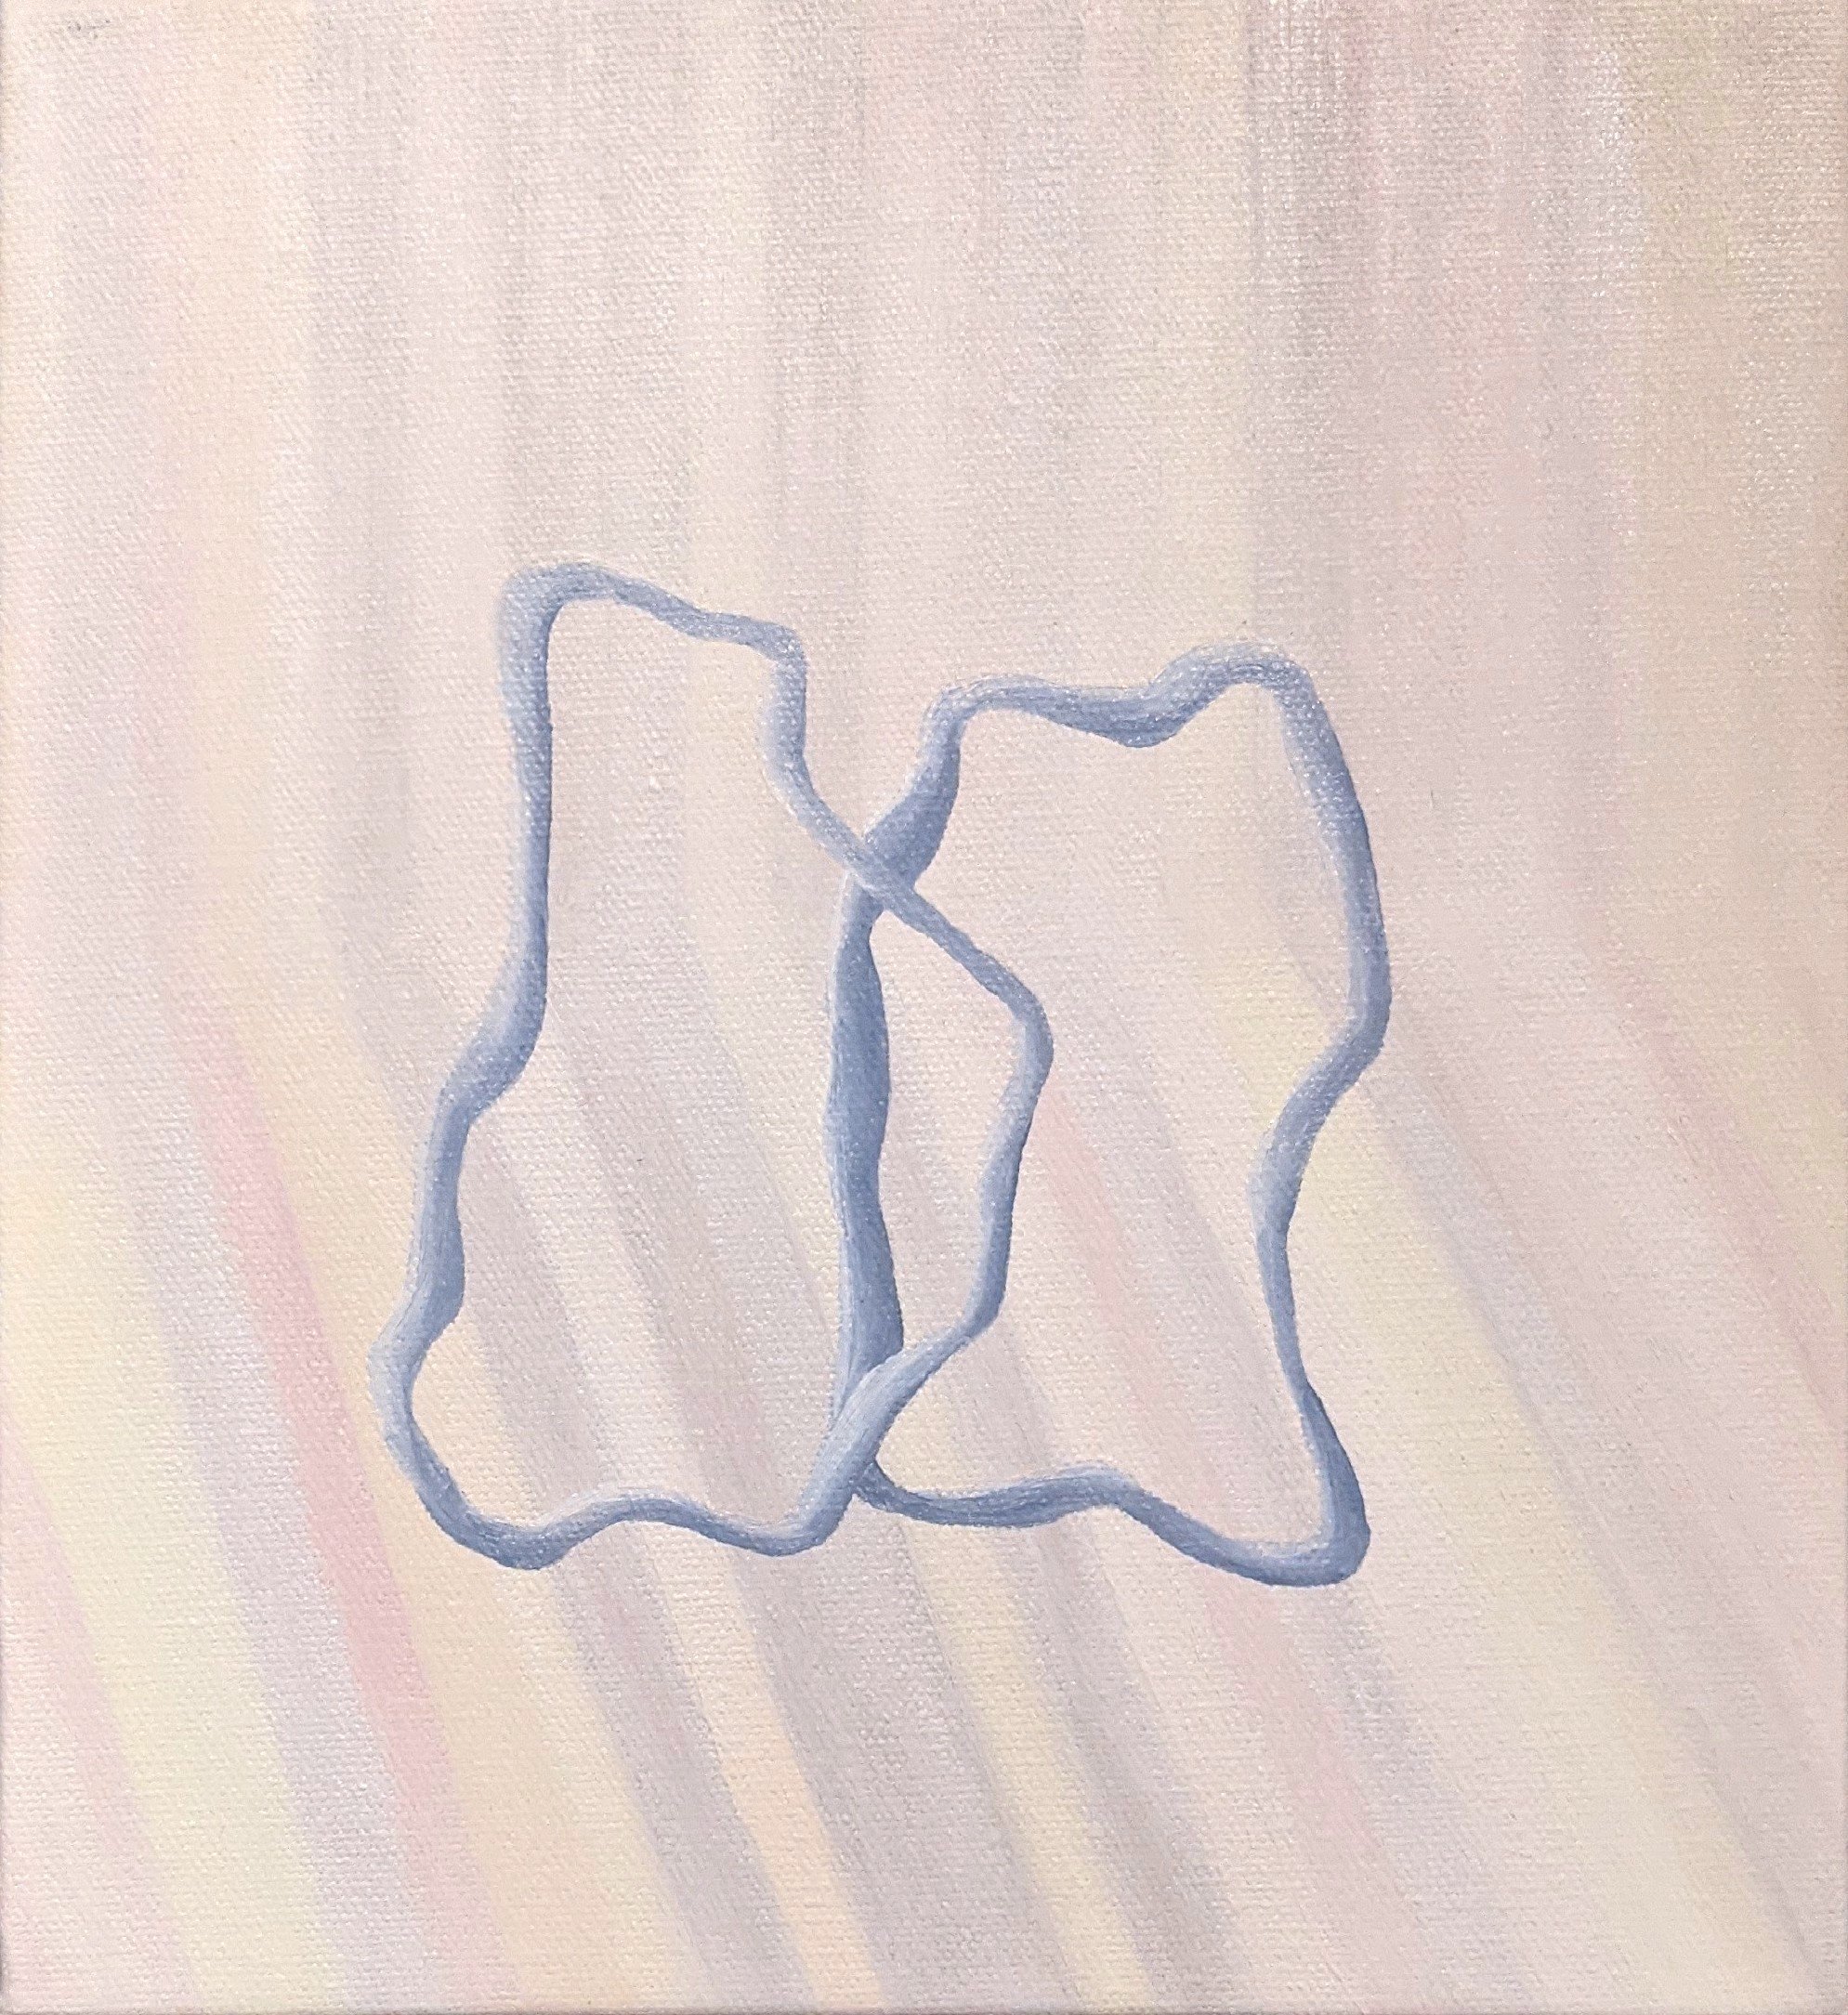 Partition, Oil on Canvas, 12" x 12", 2020, Available